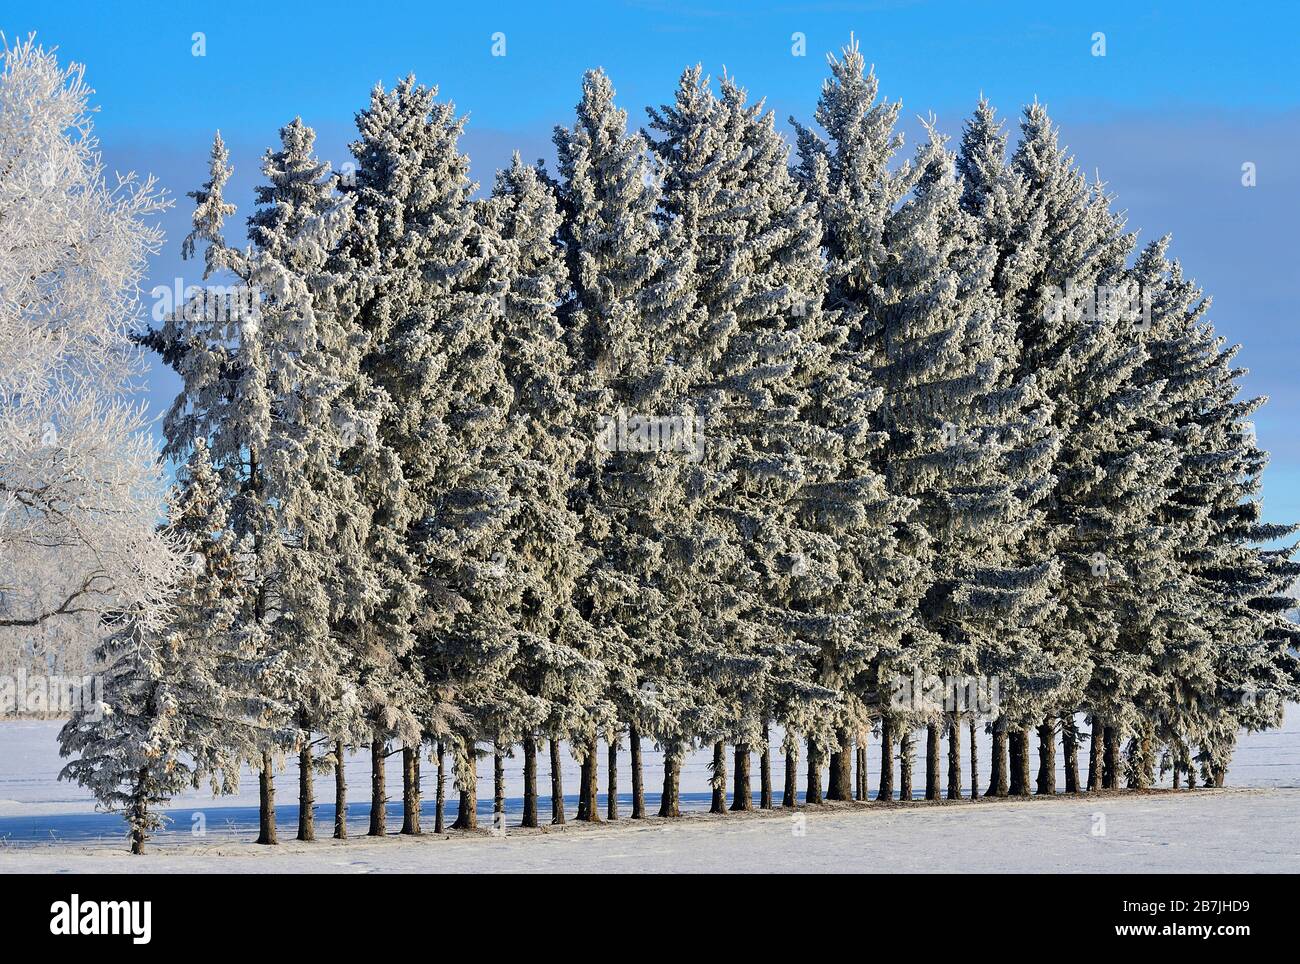 Trees planted in a line to protect property from wind damage in rural Alberta Canada. Stock Photo